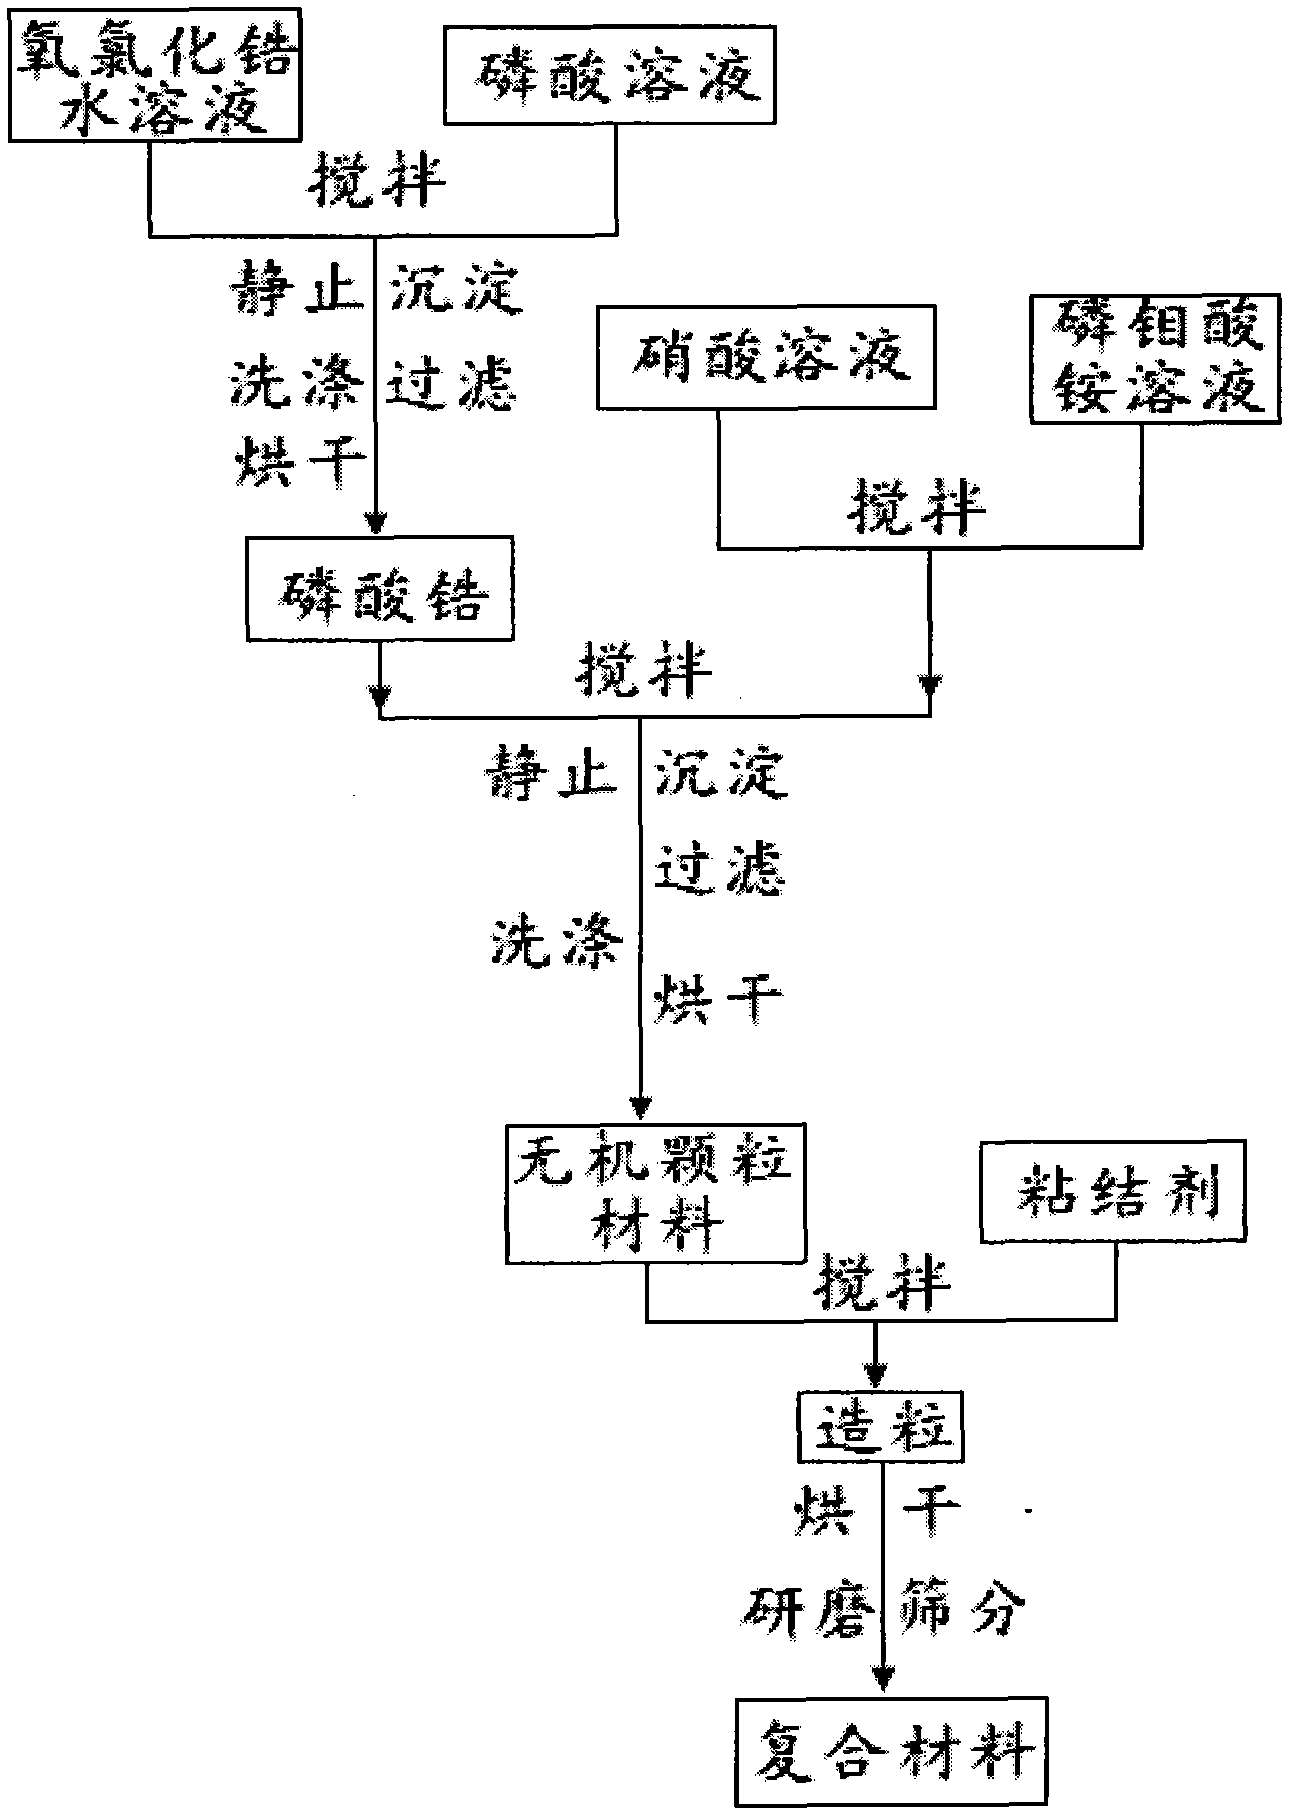 Preparation method for cesium-137 extracting composite material